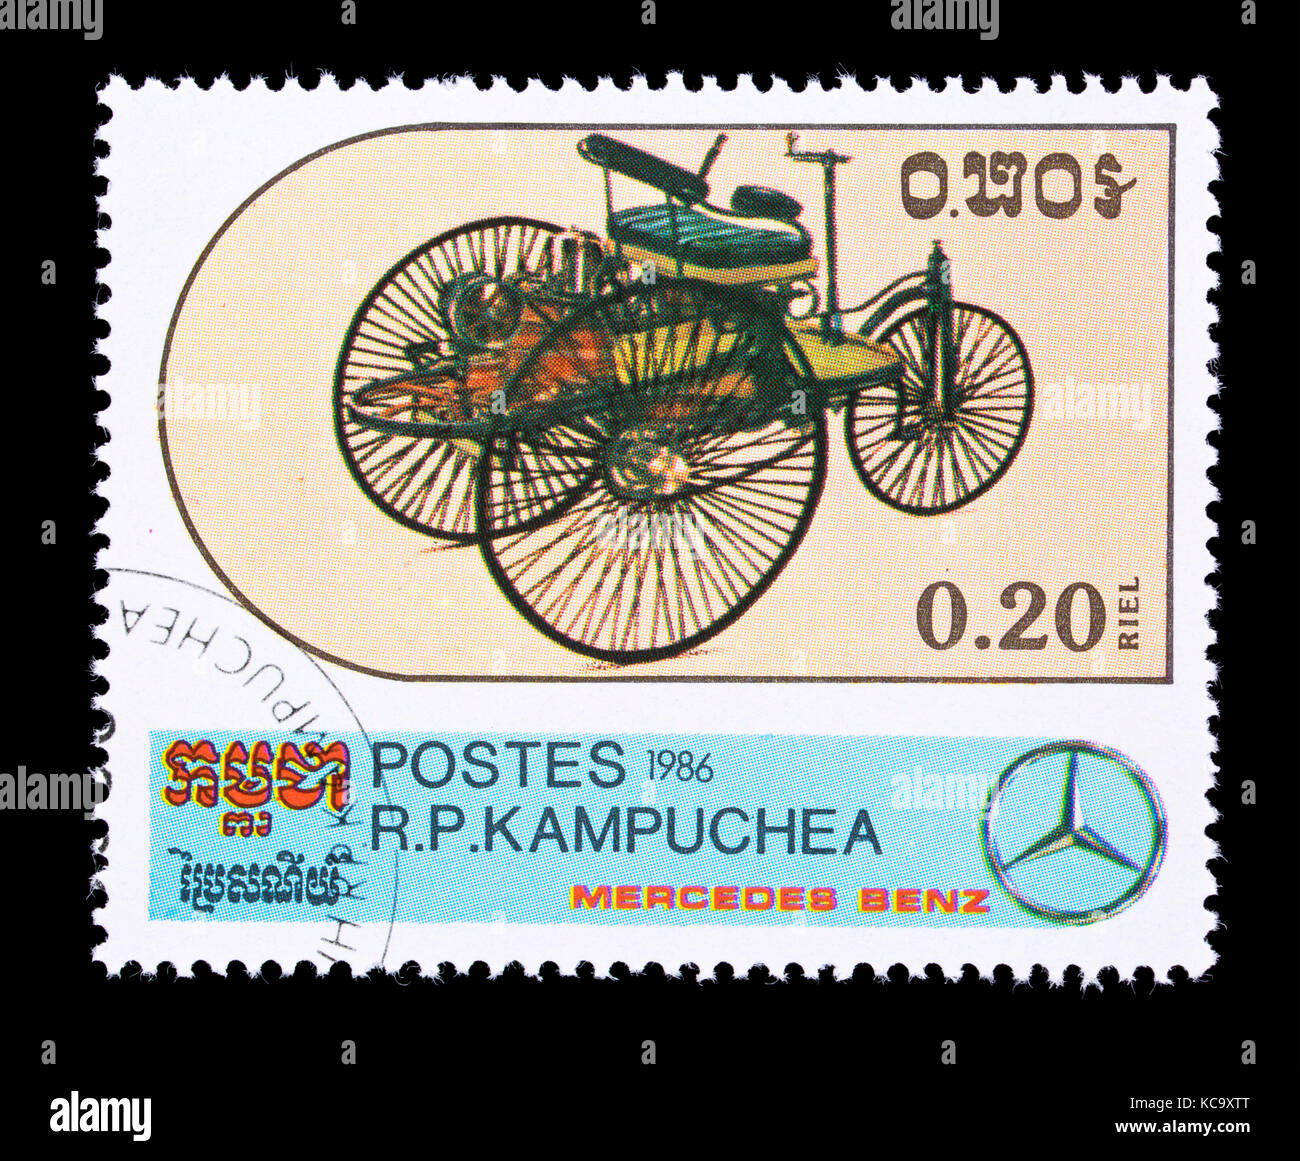 Postage stamp from Cambodia (Kampuchea) depicting a classic Mercedes Benz car. Stock Photo